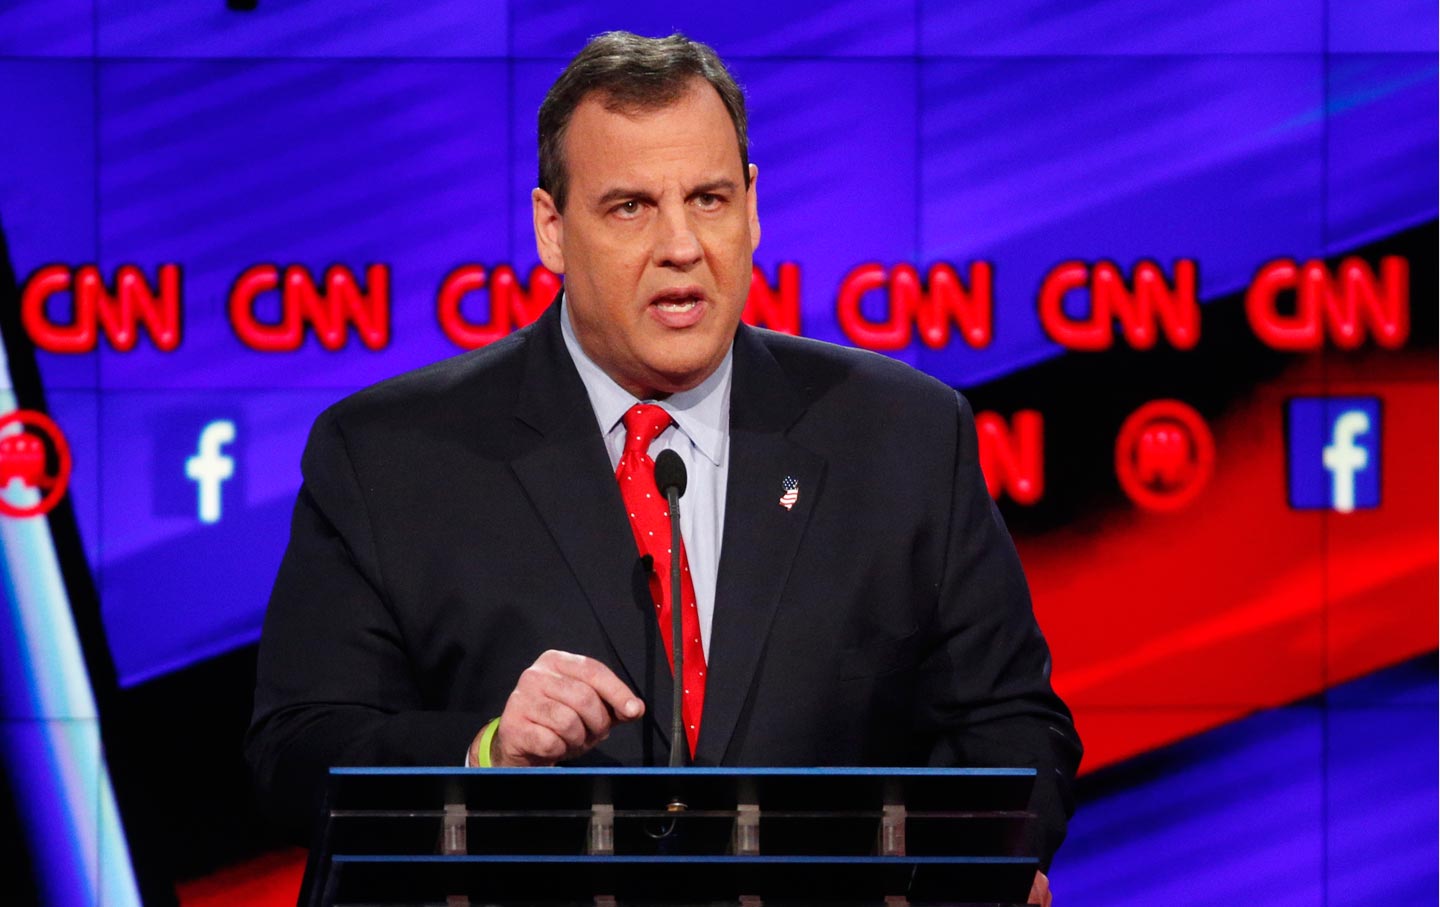 Chris Christie Says He’d Shoot Down Russian Planes and Trigger War